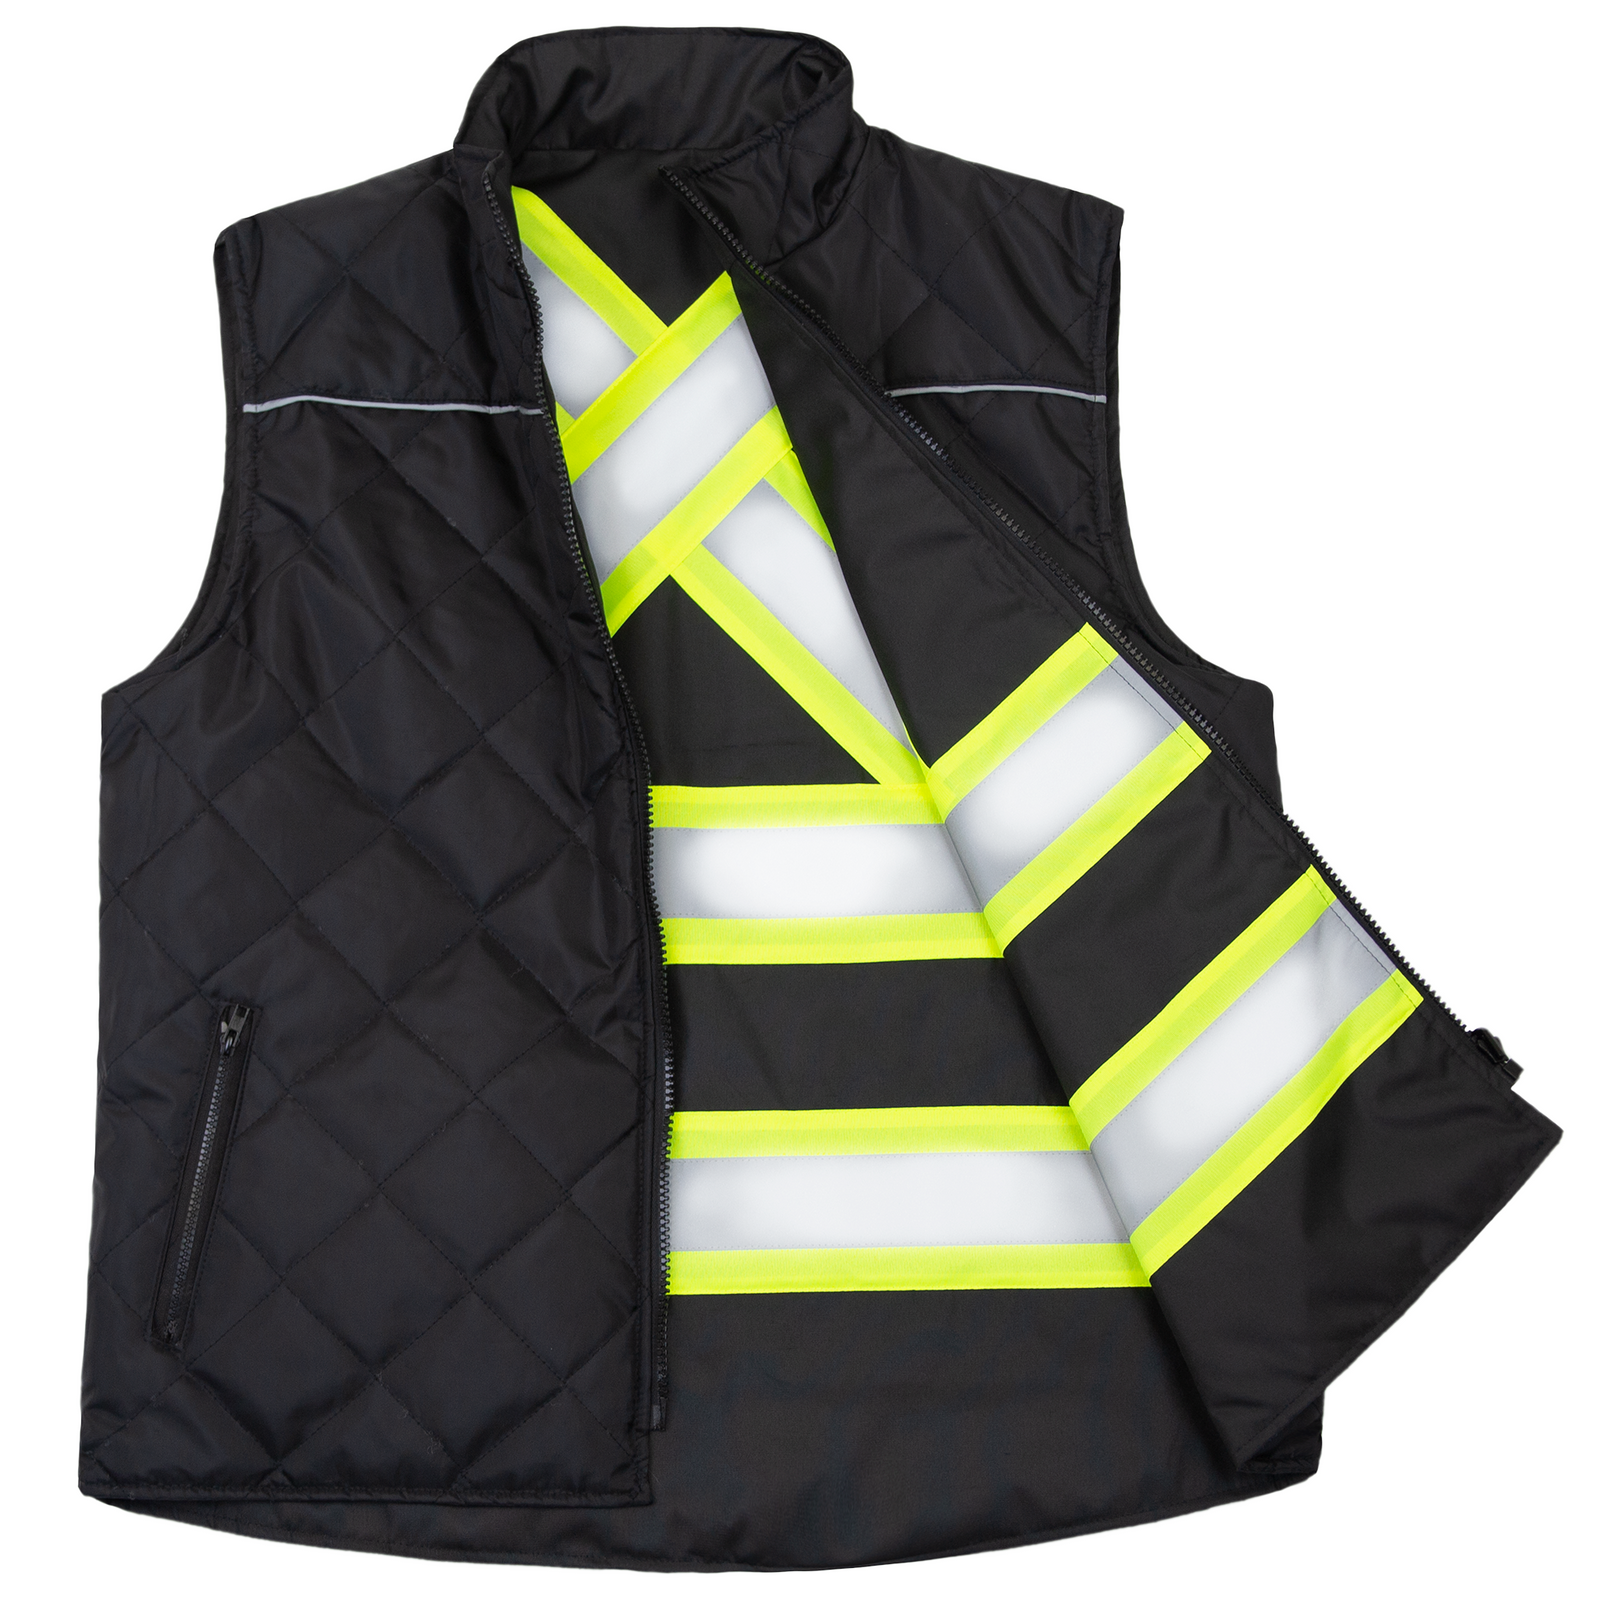 Diagonal view of the black side of the JORESTECH vi-vis X on back reversible insulated safety vest with reflective strips for cold weather